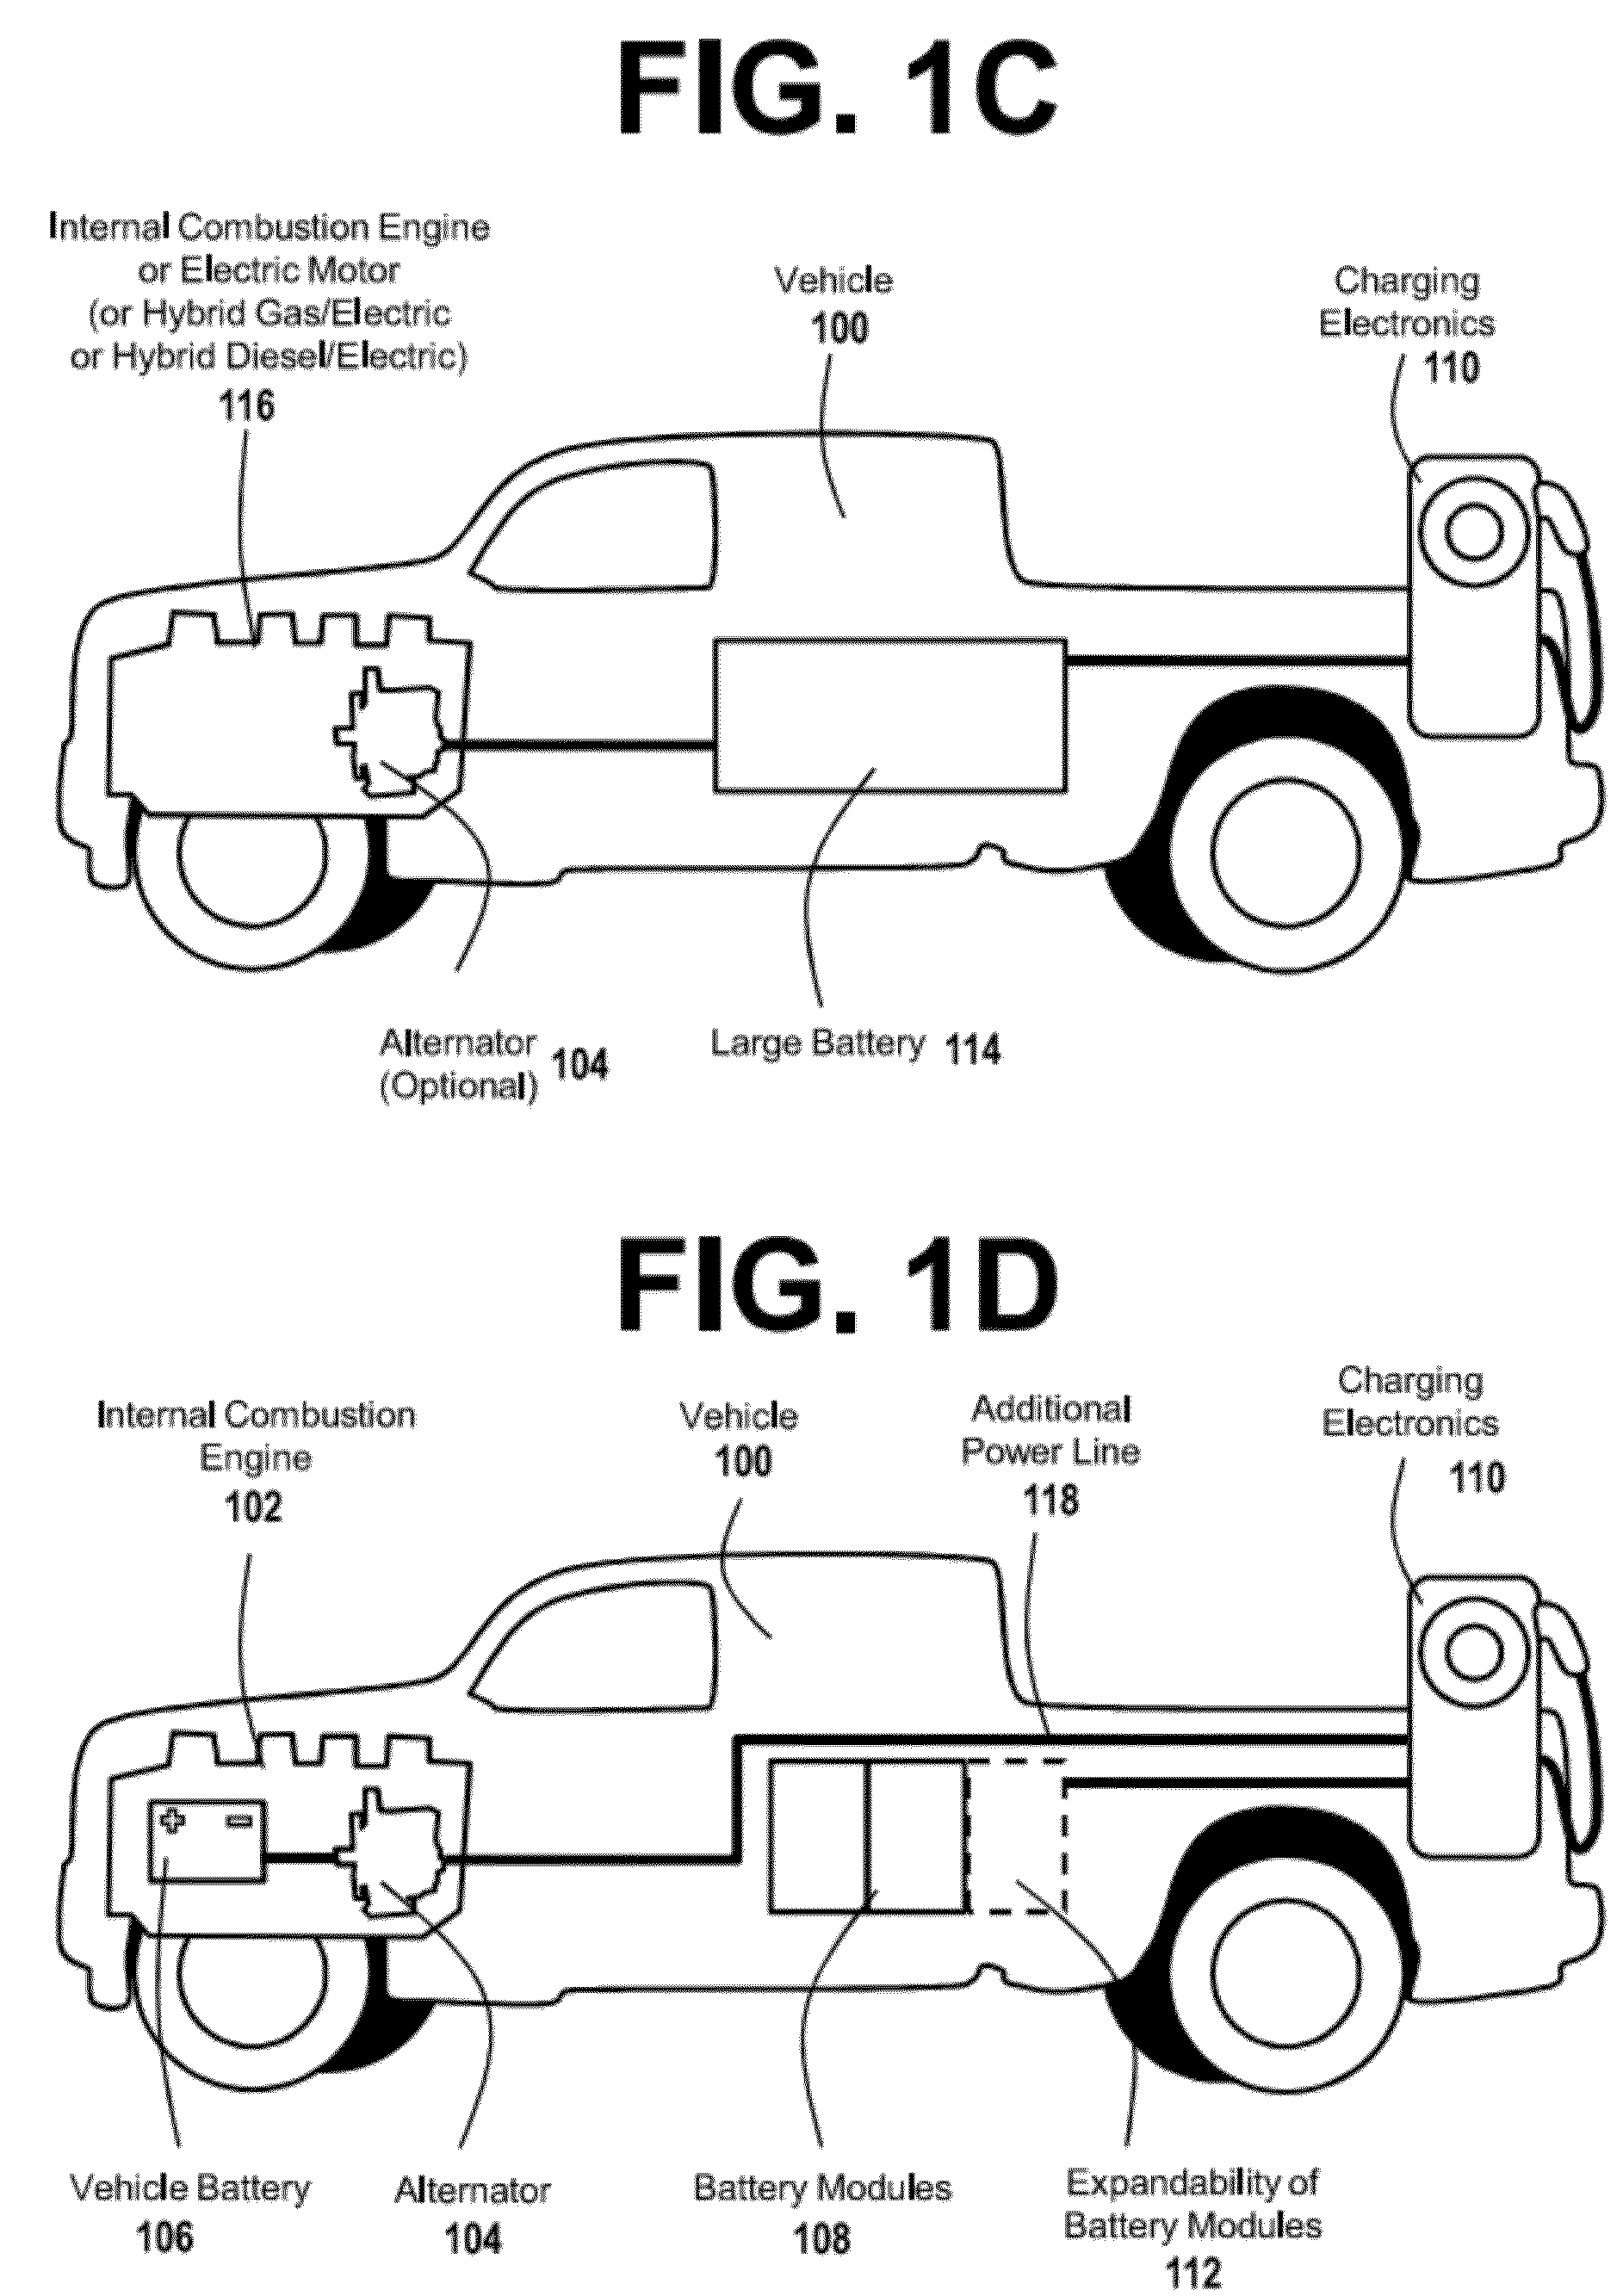 Charging Service Vehicles With Battery and Generator Sources